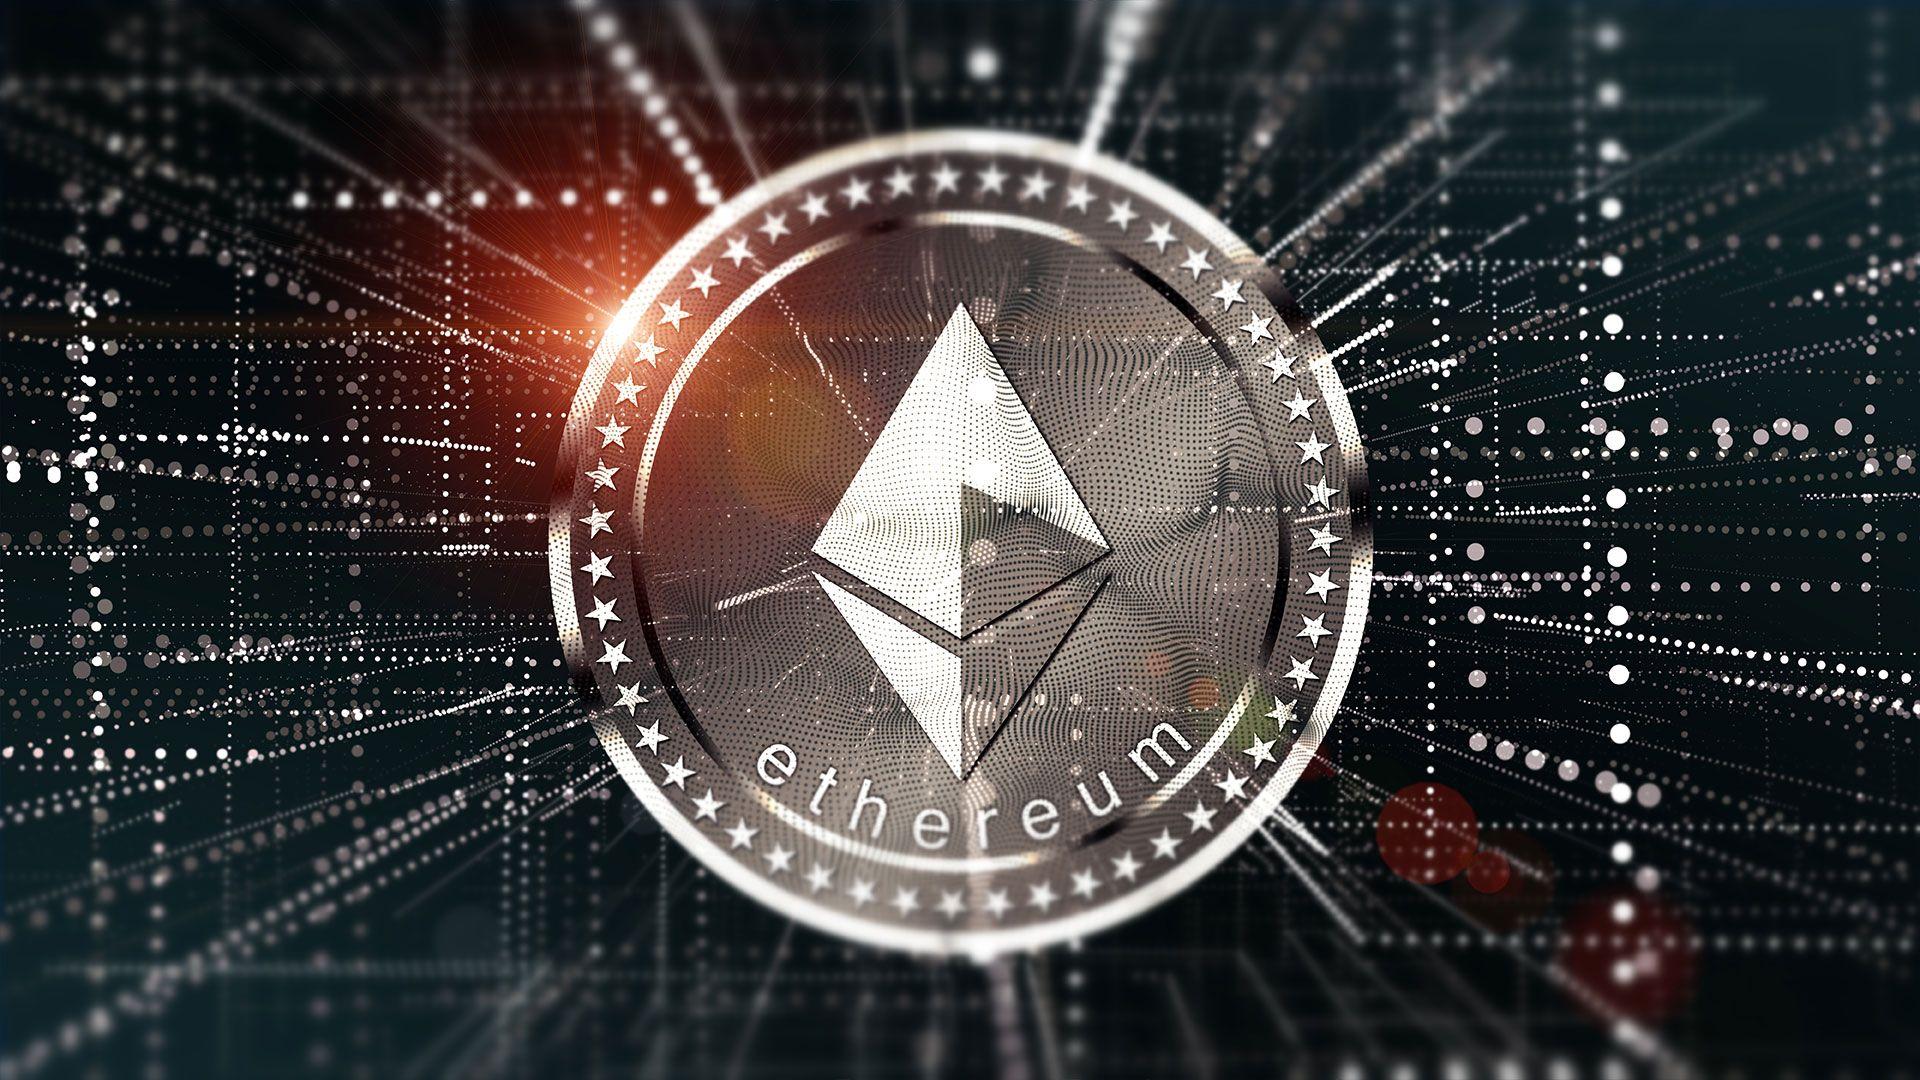 what is the lowest you see ethereum reaching reddit